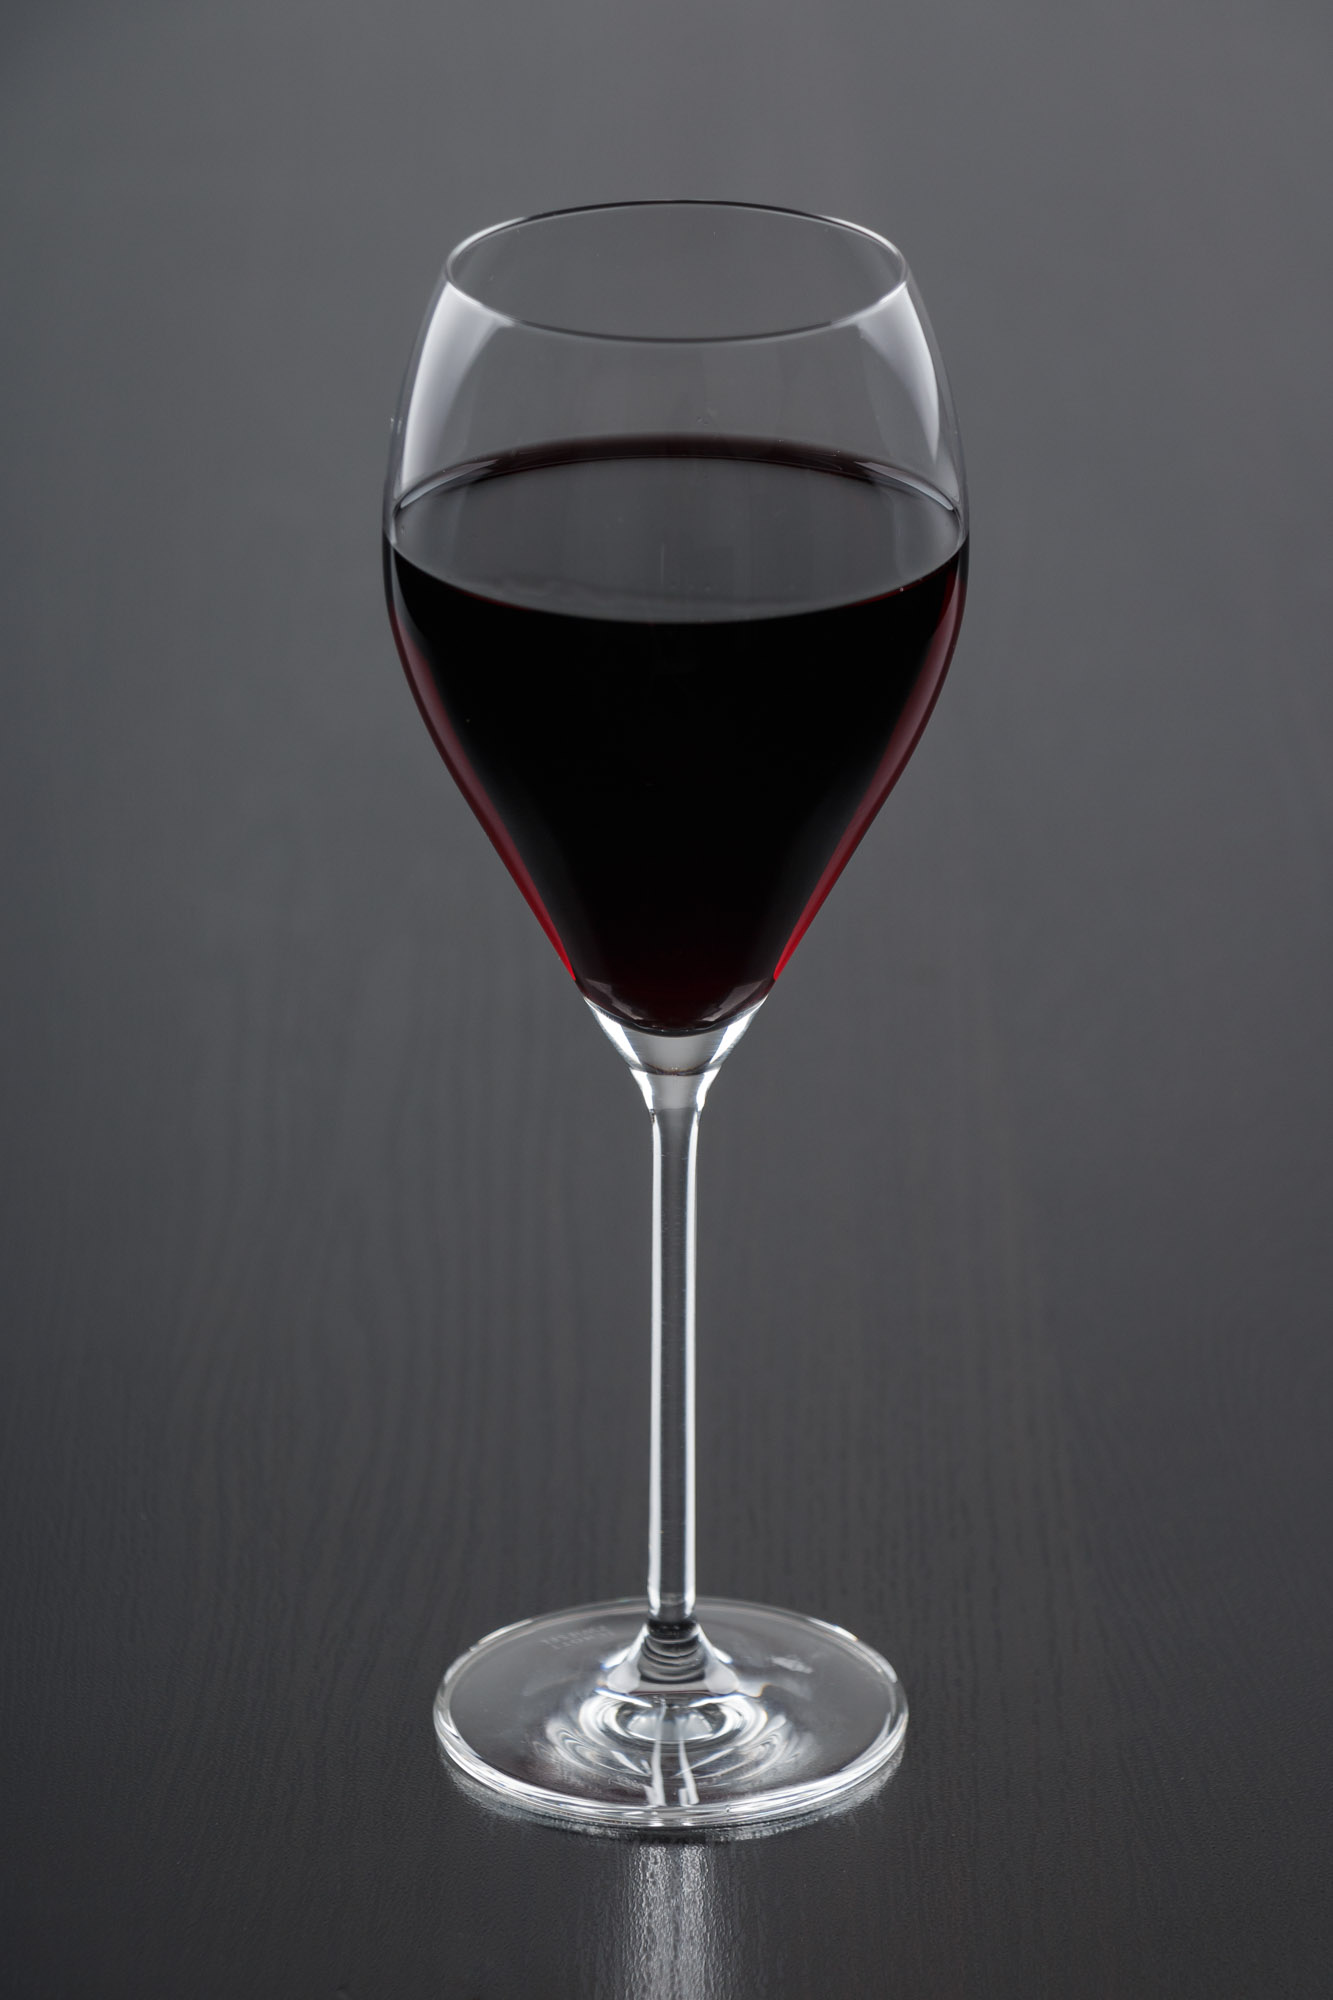 an almost empty glass of wine is seen